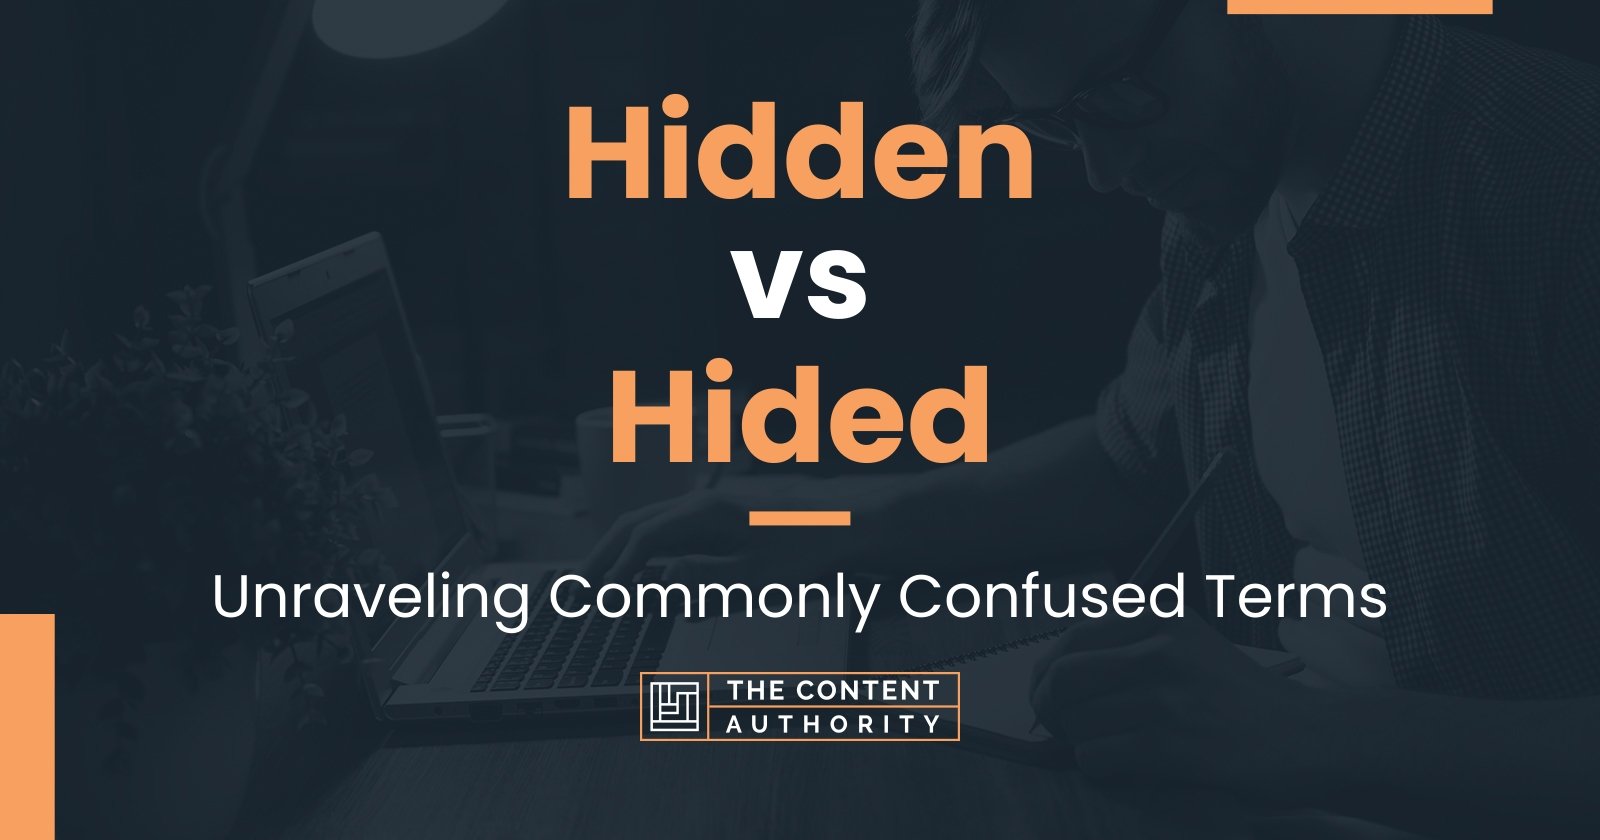 Hidden vs Hided: Unraveling Commonly Confused Terms